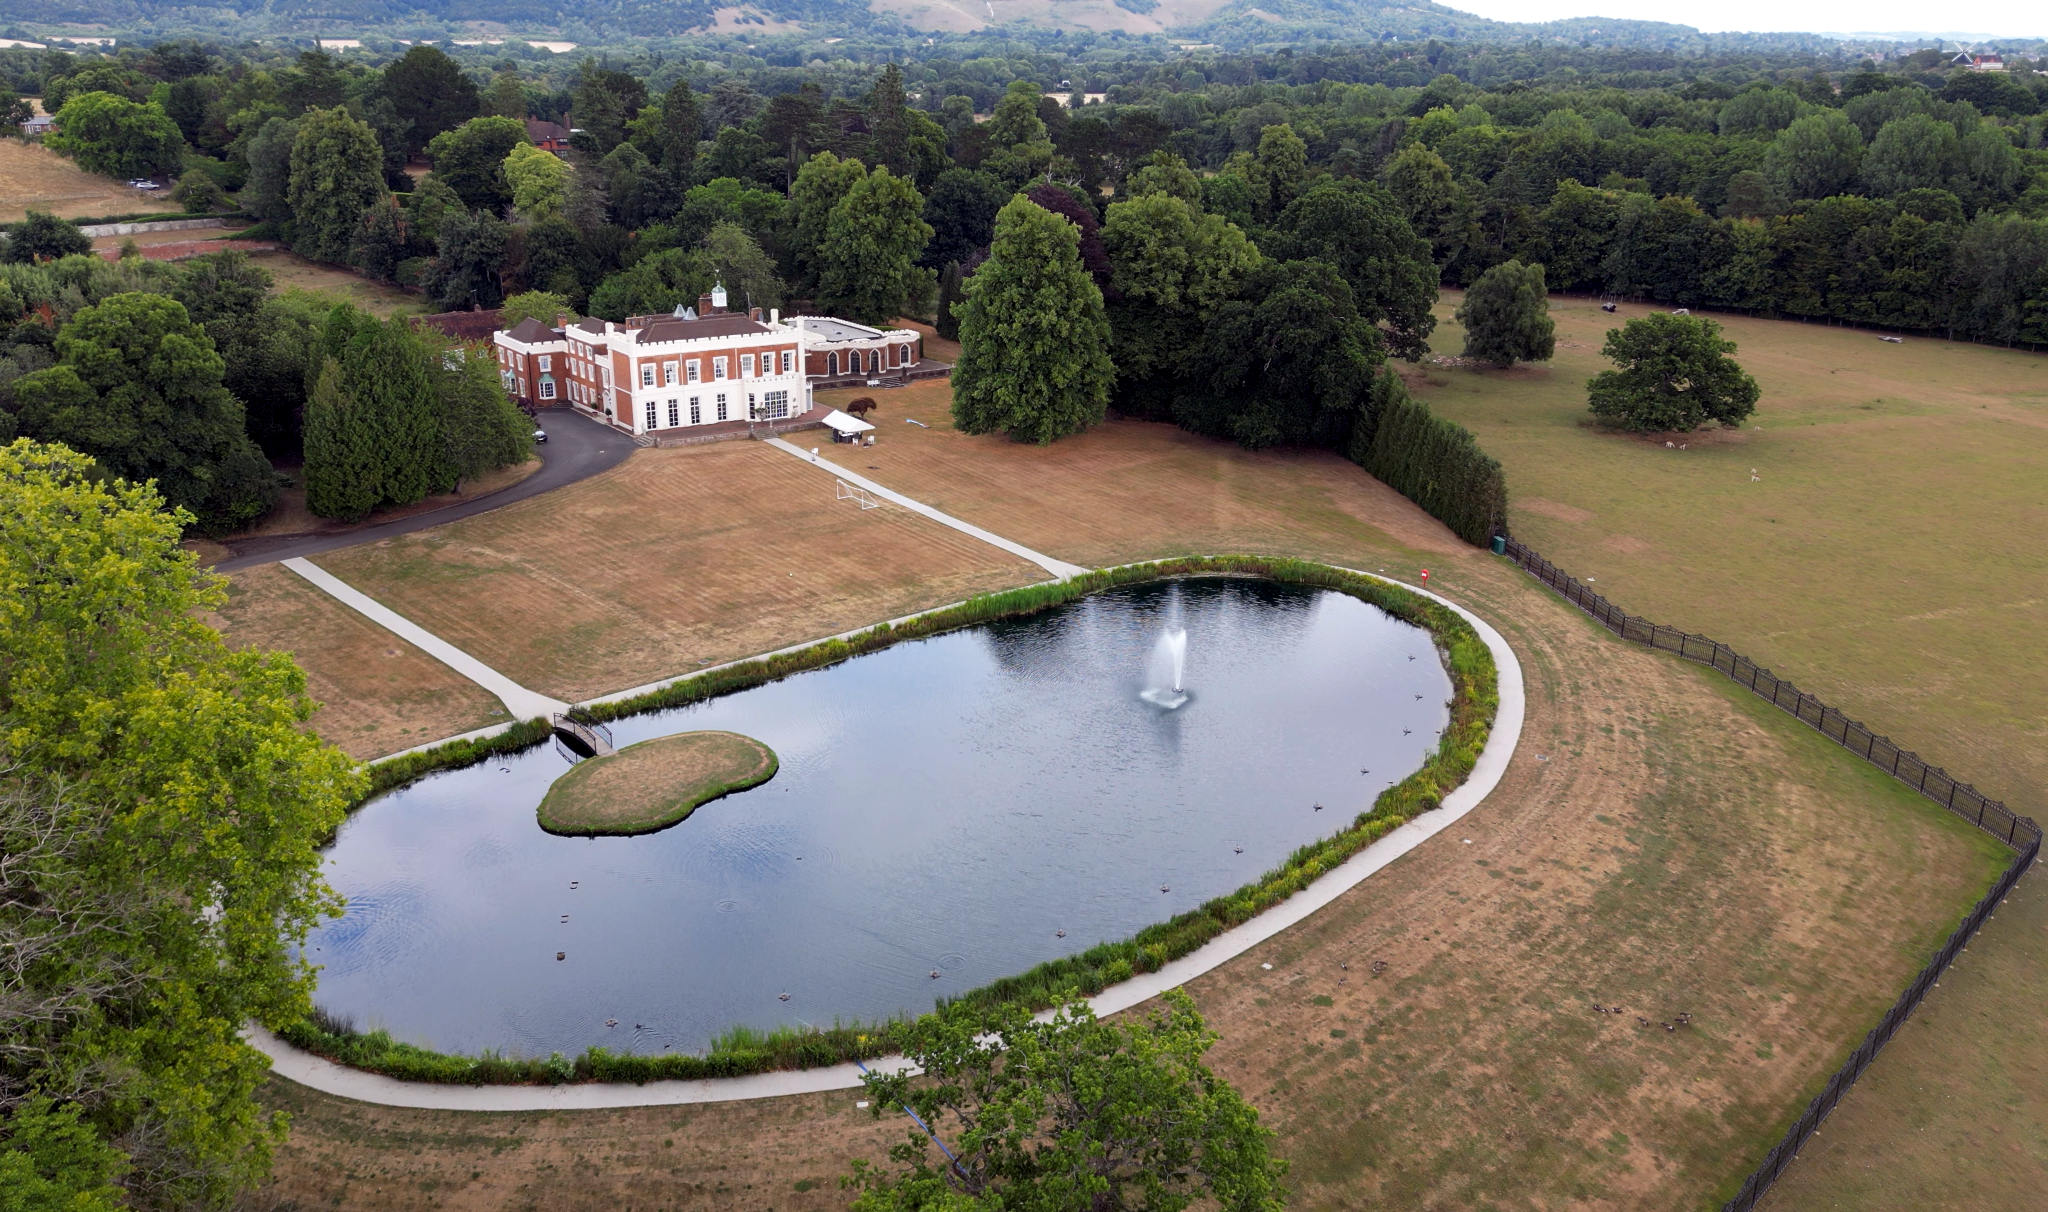 Sultan’s Surrey mansion revealed in new film